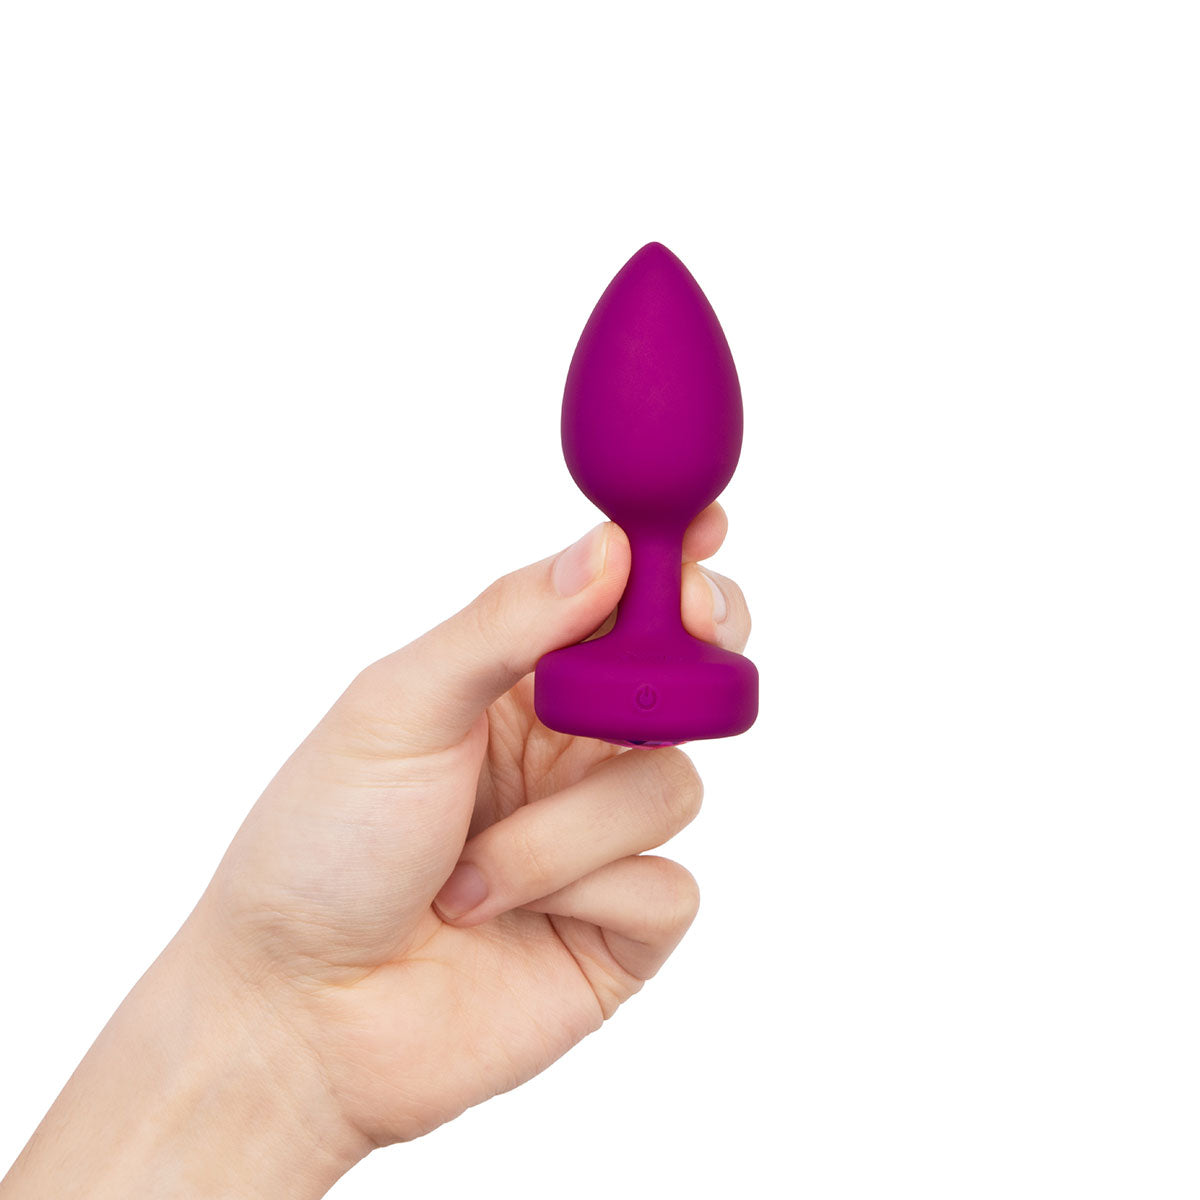 b-Vibe Vibrating Jewel Rechargeable Remote-Controlled Anal Plug with Gem Base Pink Ruby S/M - Zateo Joy